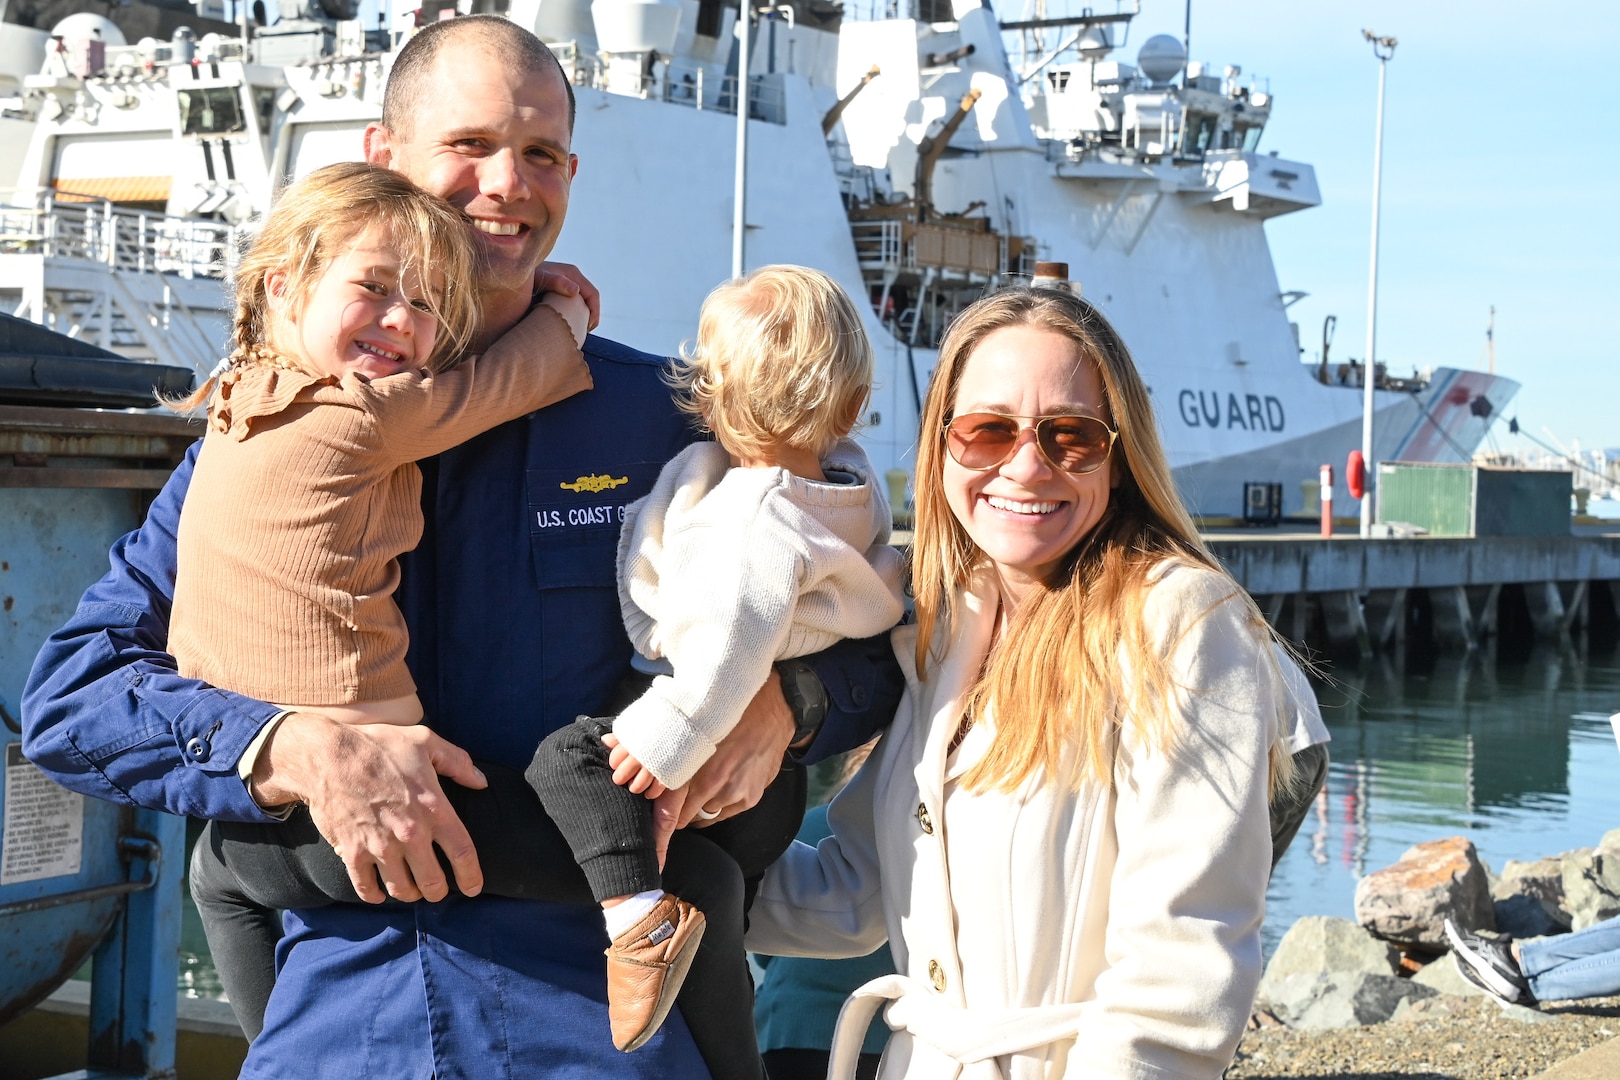 Family and friends celebrate as the U.S. Coast Guard Cutter Waesche (WMSL 751) crew returns to homeport in Alameda, Calif., Dec. 9, 2023. The Waesche and crew spent 89-days patrolling more than 19,740 miles in the Eastern Pacific Ocean conducting law enforcement and search and rescue operations in international waters off Central and South America. (U.S. Coast Guard photo by Senior Chief Petty Officer Charly Tautfest)